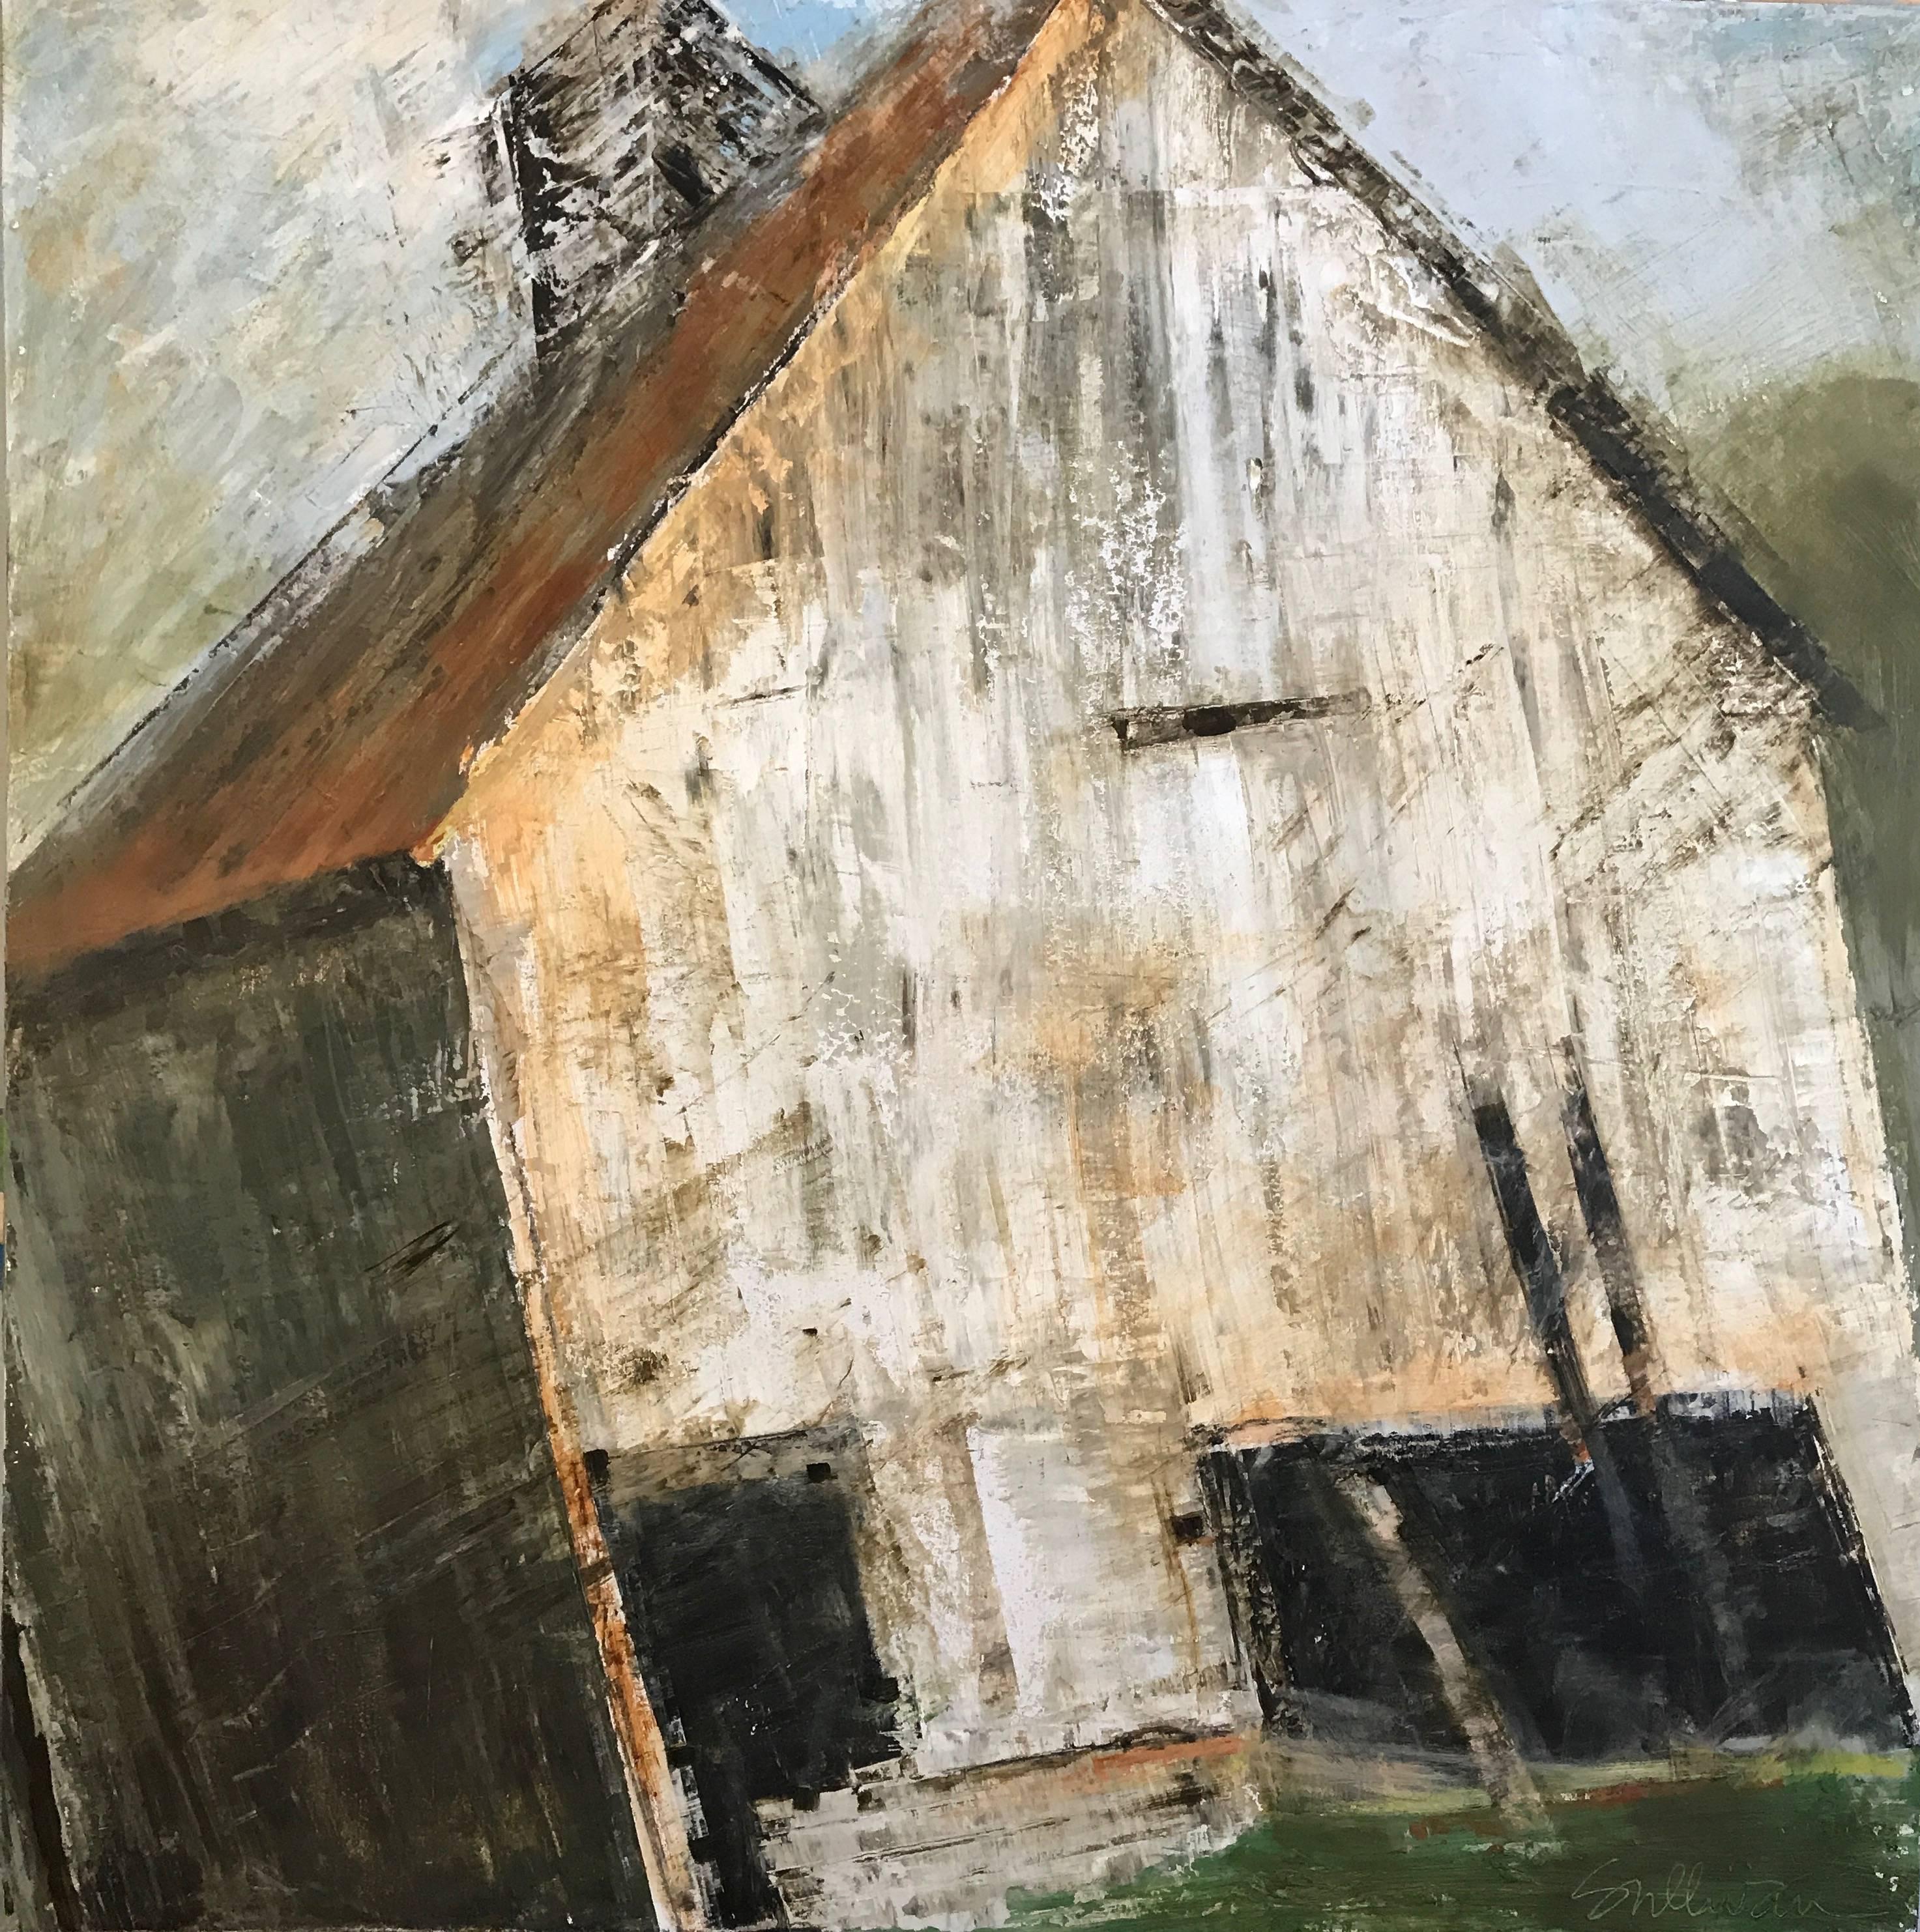 Amy Sullivan Landscape Painting - "Not Forgotten" Large Contemporary Barn Mixed Media on Board Painting